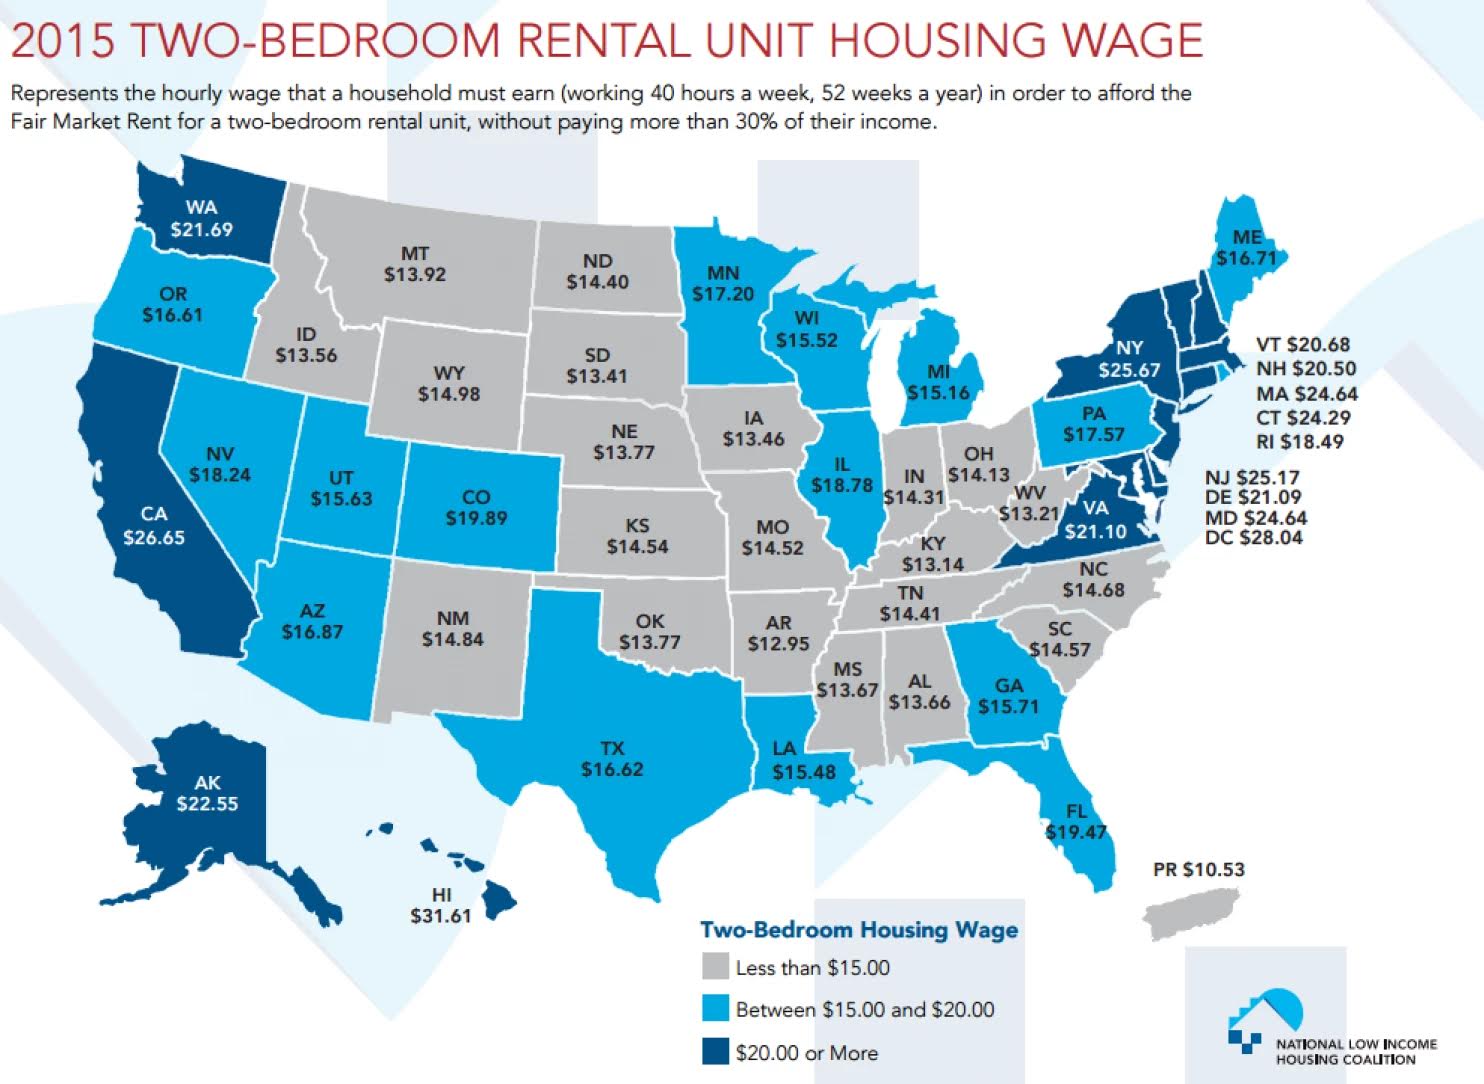 http://www.ritholtz.com/blog/2015/06/2015-two-bedroom-rental-unit-housing-wage/